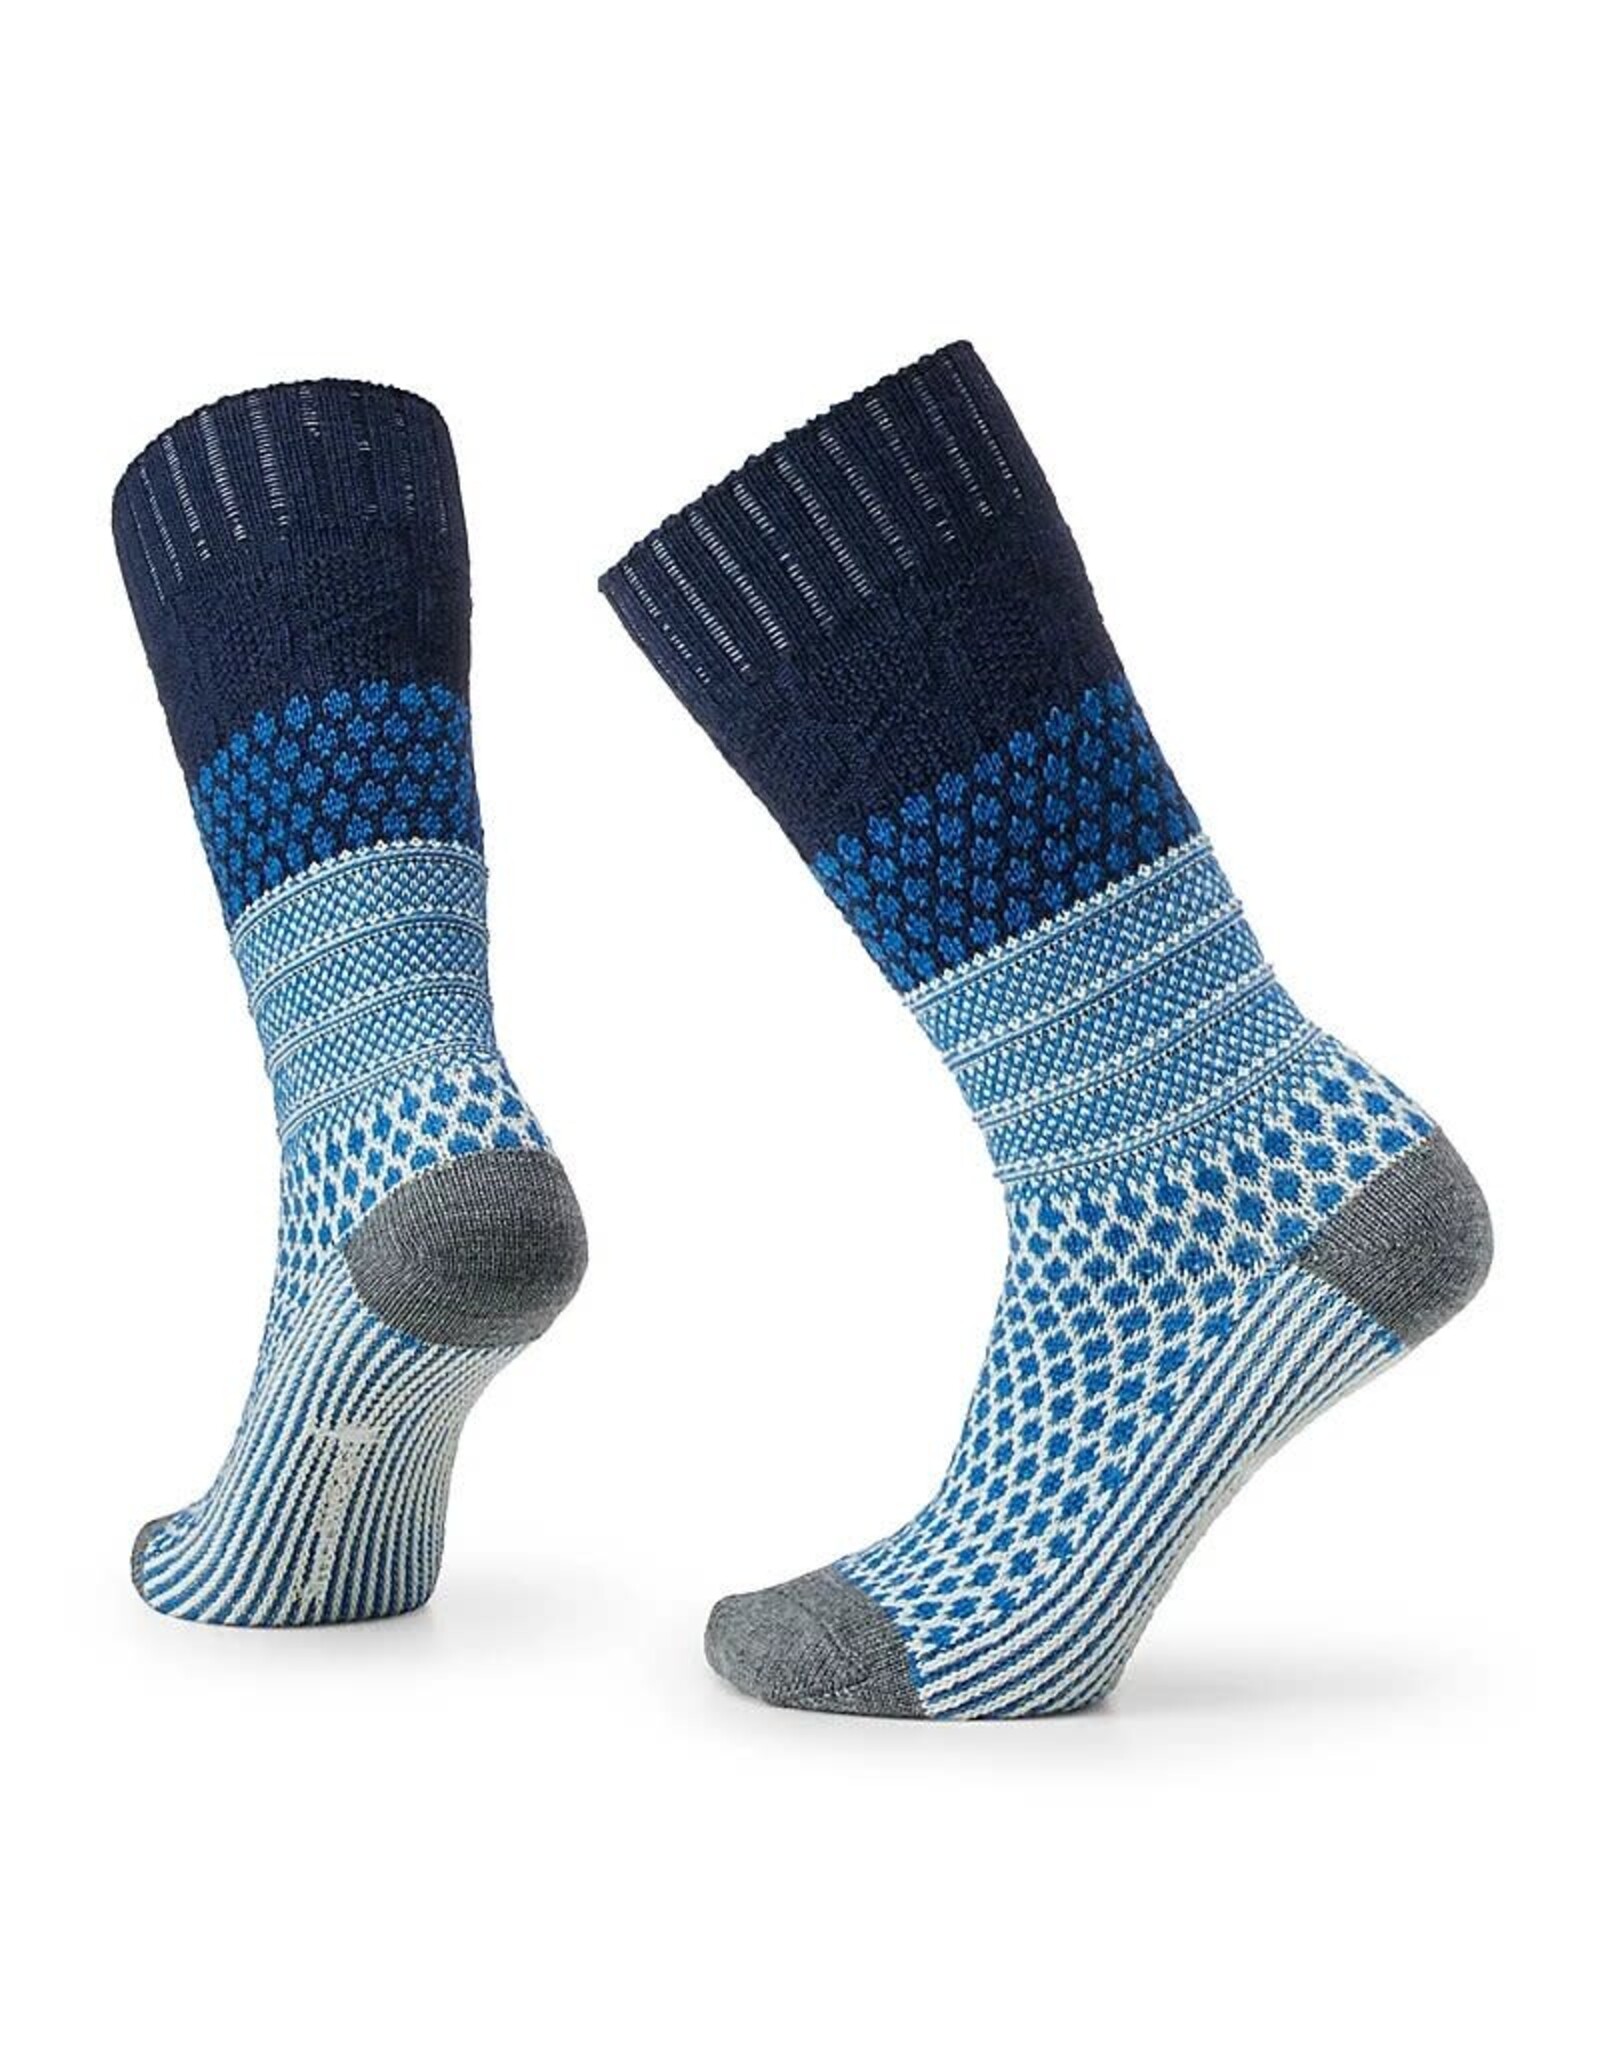 Smartwool Smartwool Everyday Popcorn Cable Crew Socks